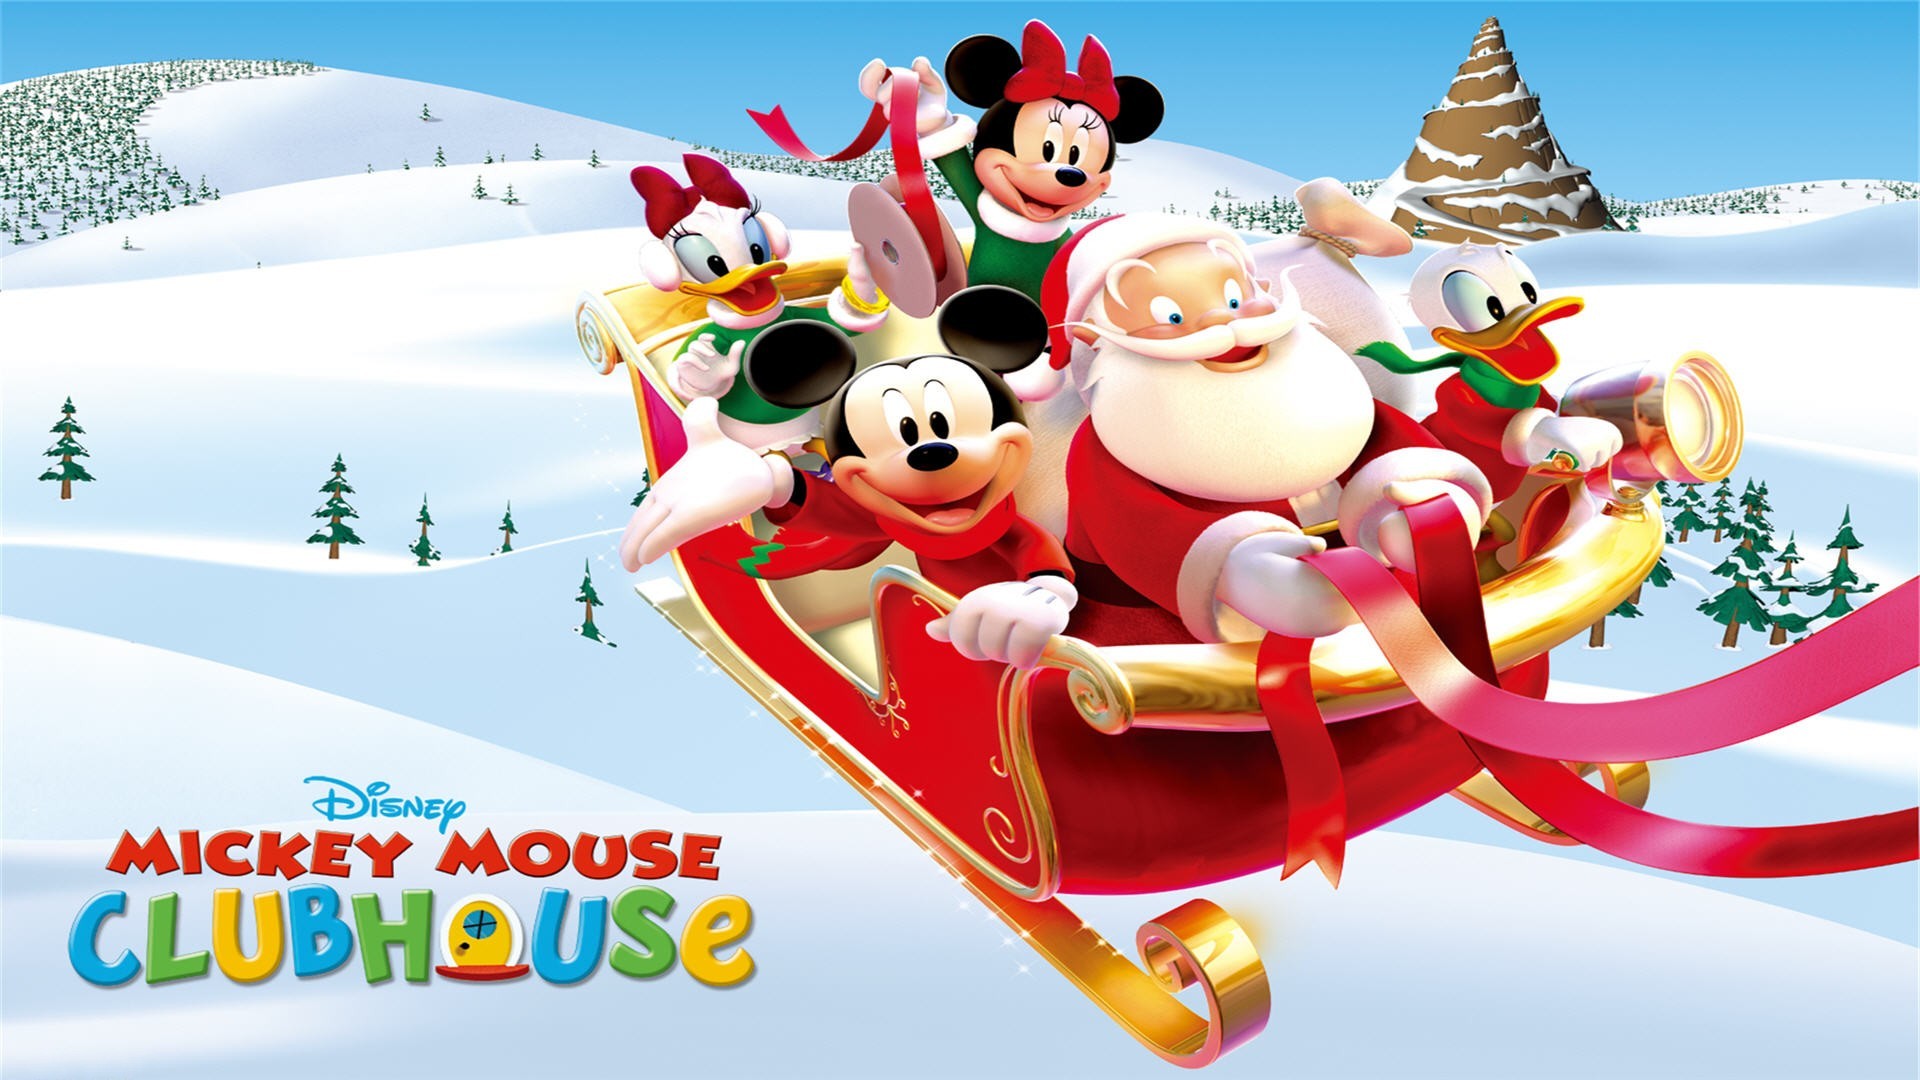 50 Mickey Mouse Clubhouse Images Wallpapers  WallpaperSafari